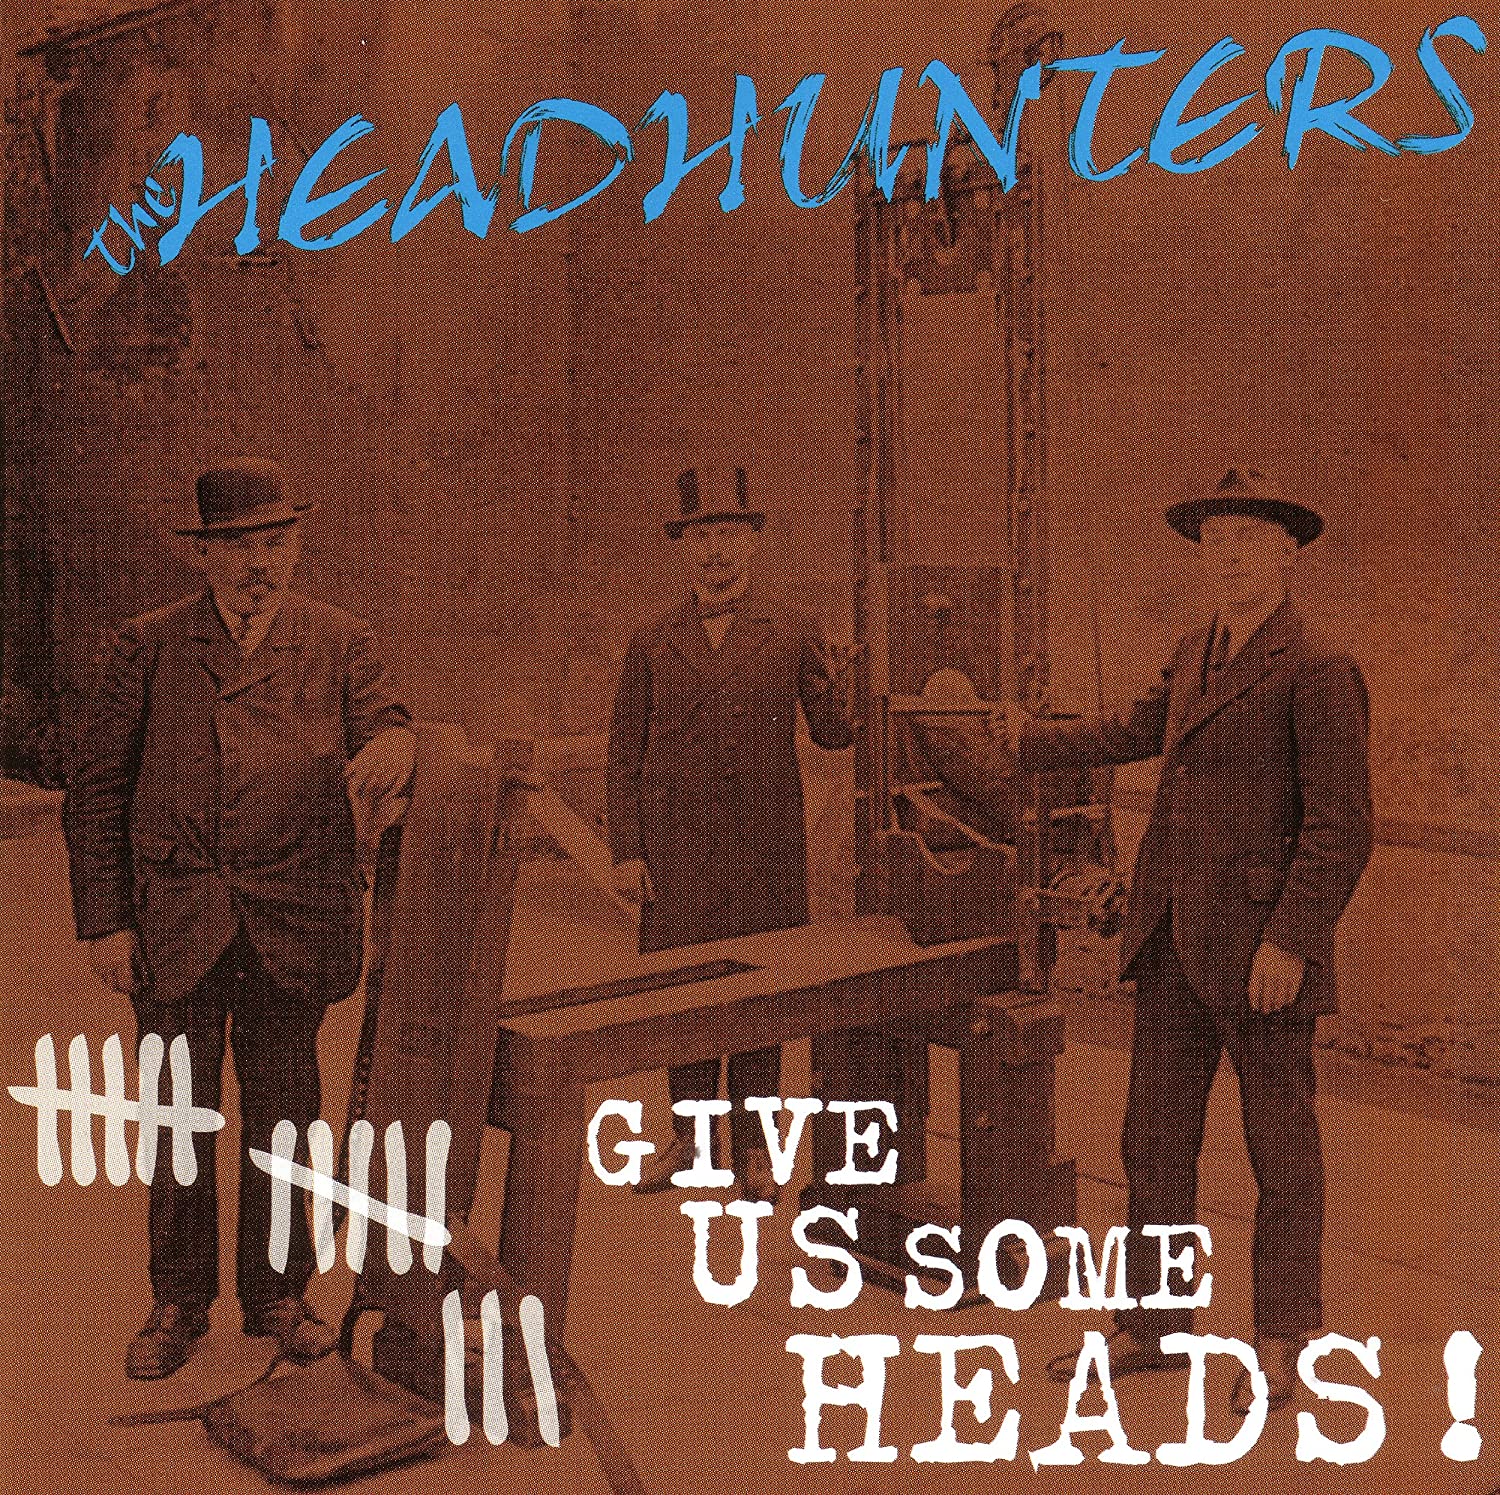 Headhunters The - Give us some heads CD